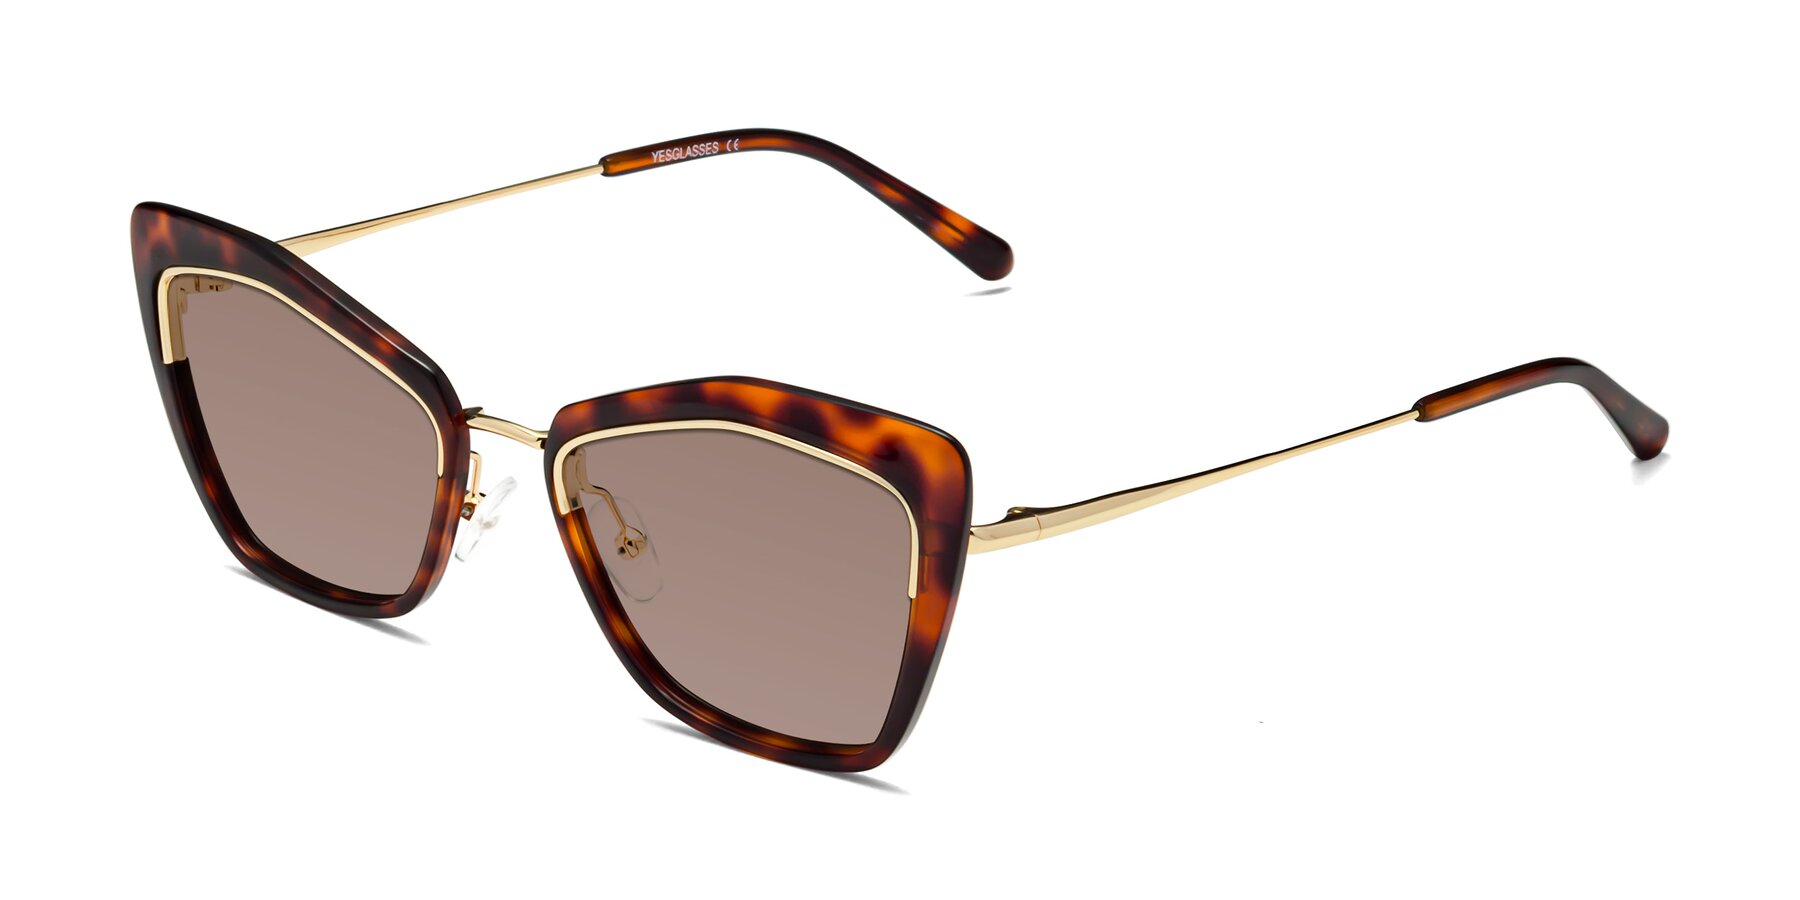 Angle of Lasso in Light Tortoise with Medium Brown Tinted Lenses